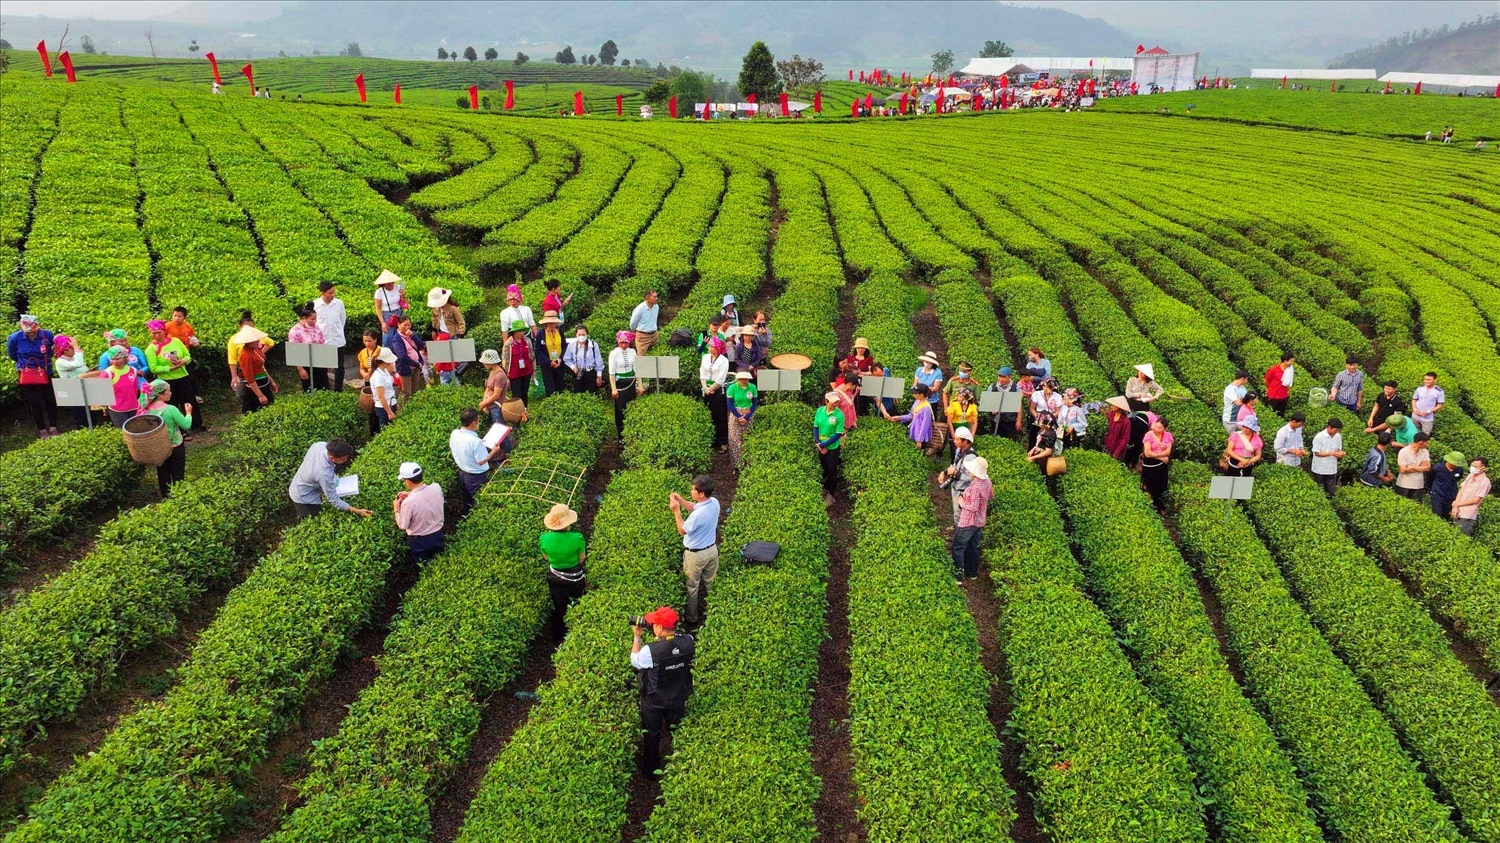 From early in the morning, a large number of people and tourists gathered in the tea area of ​​Phuc Khoa commune, Tan Uyen district to watch the tea picking and star competition of farmers.